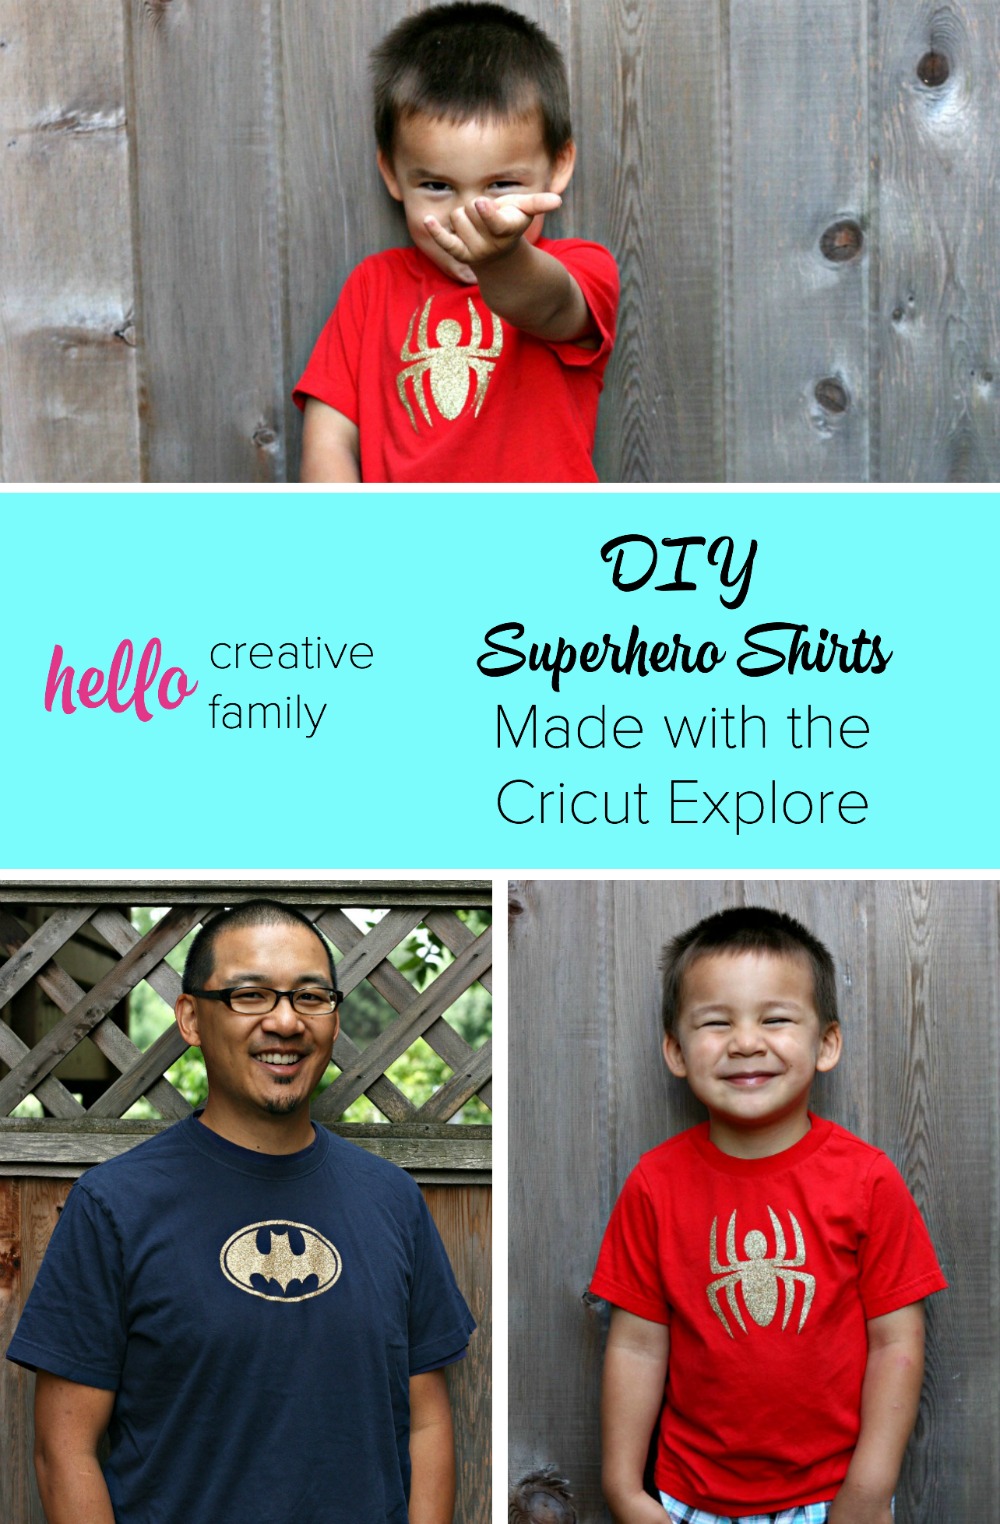 These would make such adorable birthday party favors for a boy or girl's superhero themed birthday party! Take any superhero emblem and make a DIY Superhero Shirt using the Cricut Explore. What a fun Cricut project!